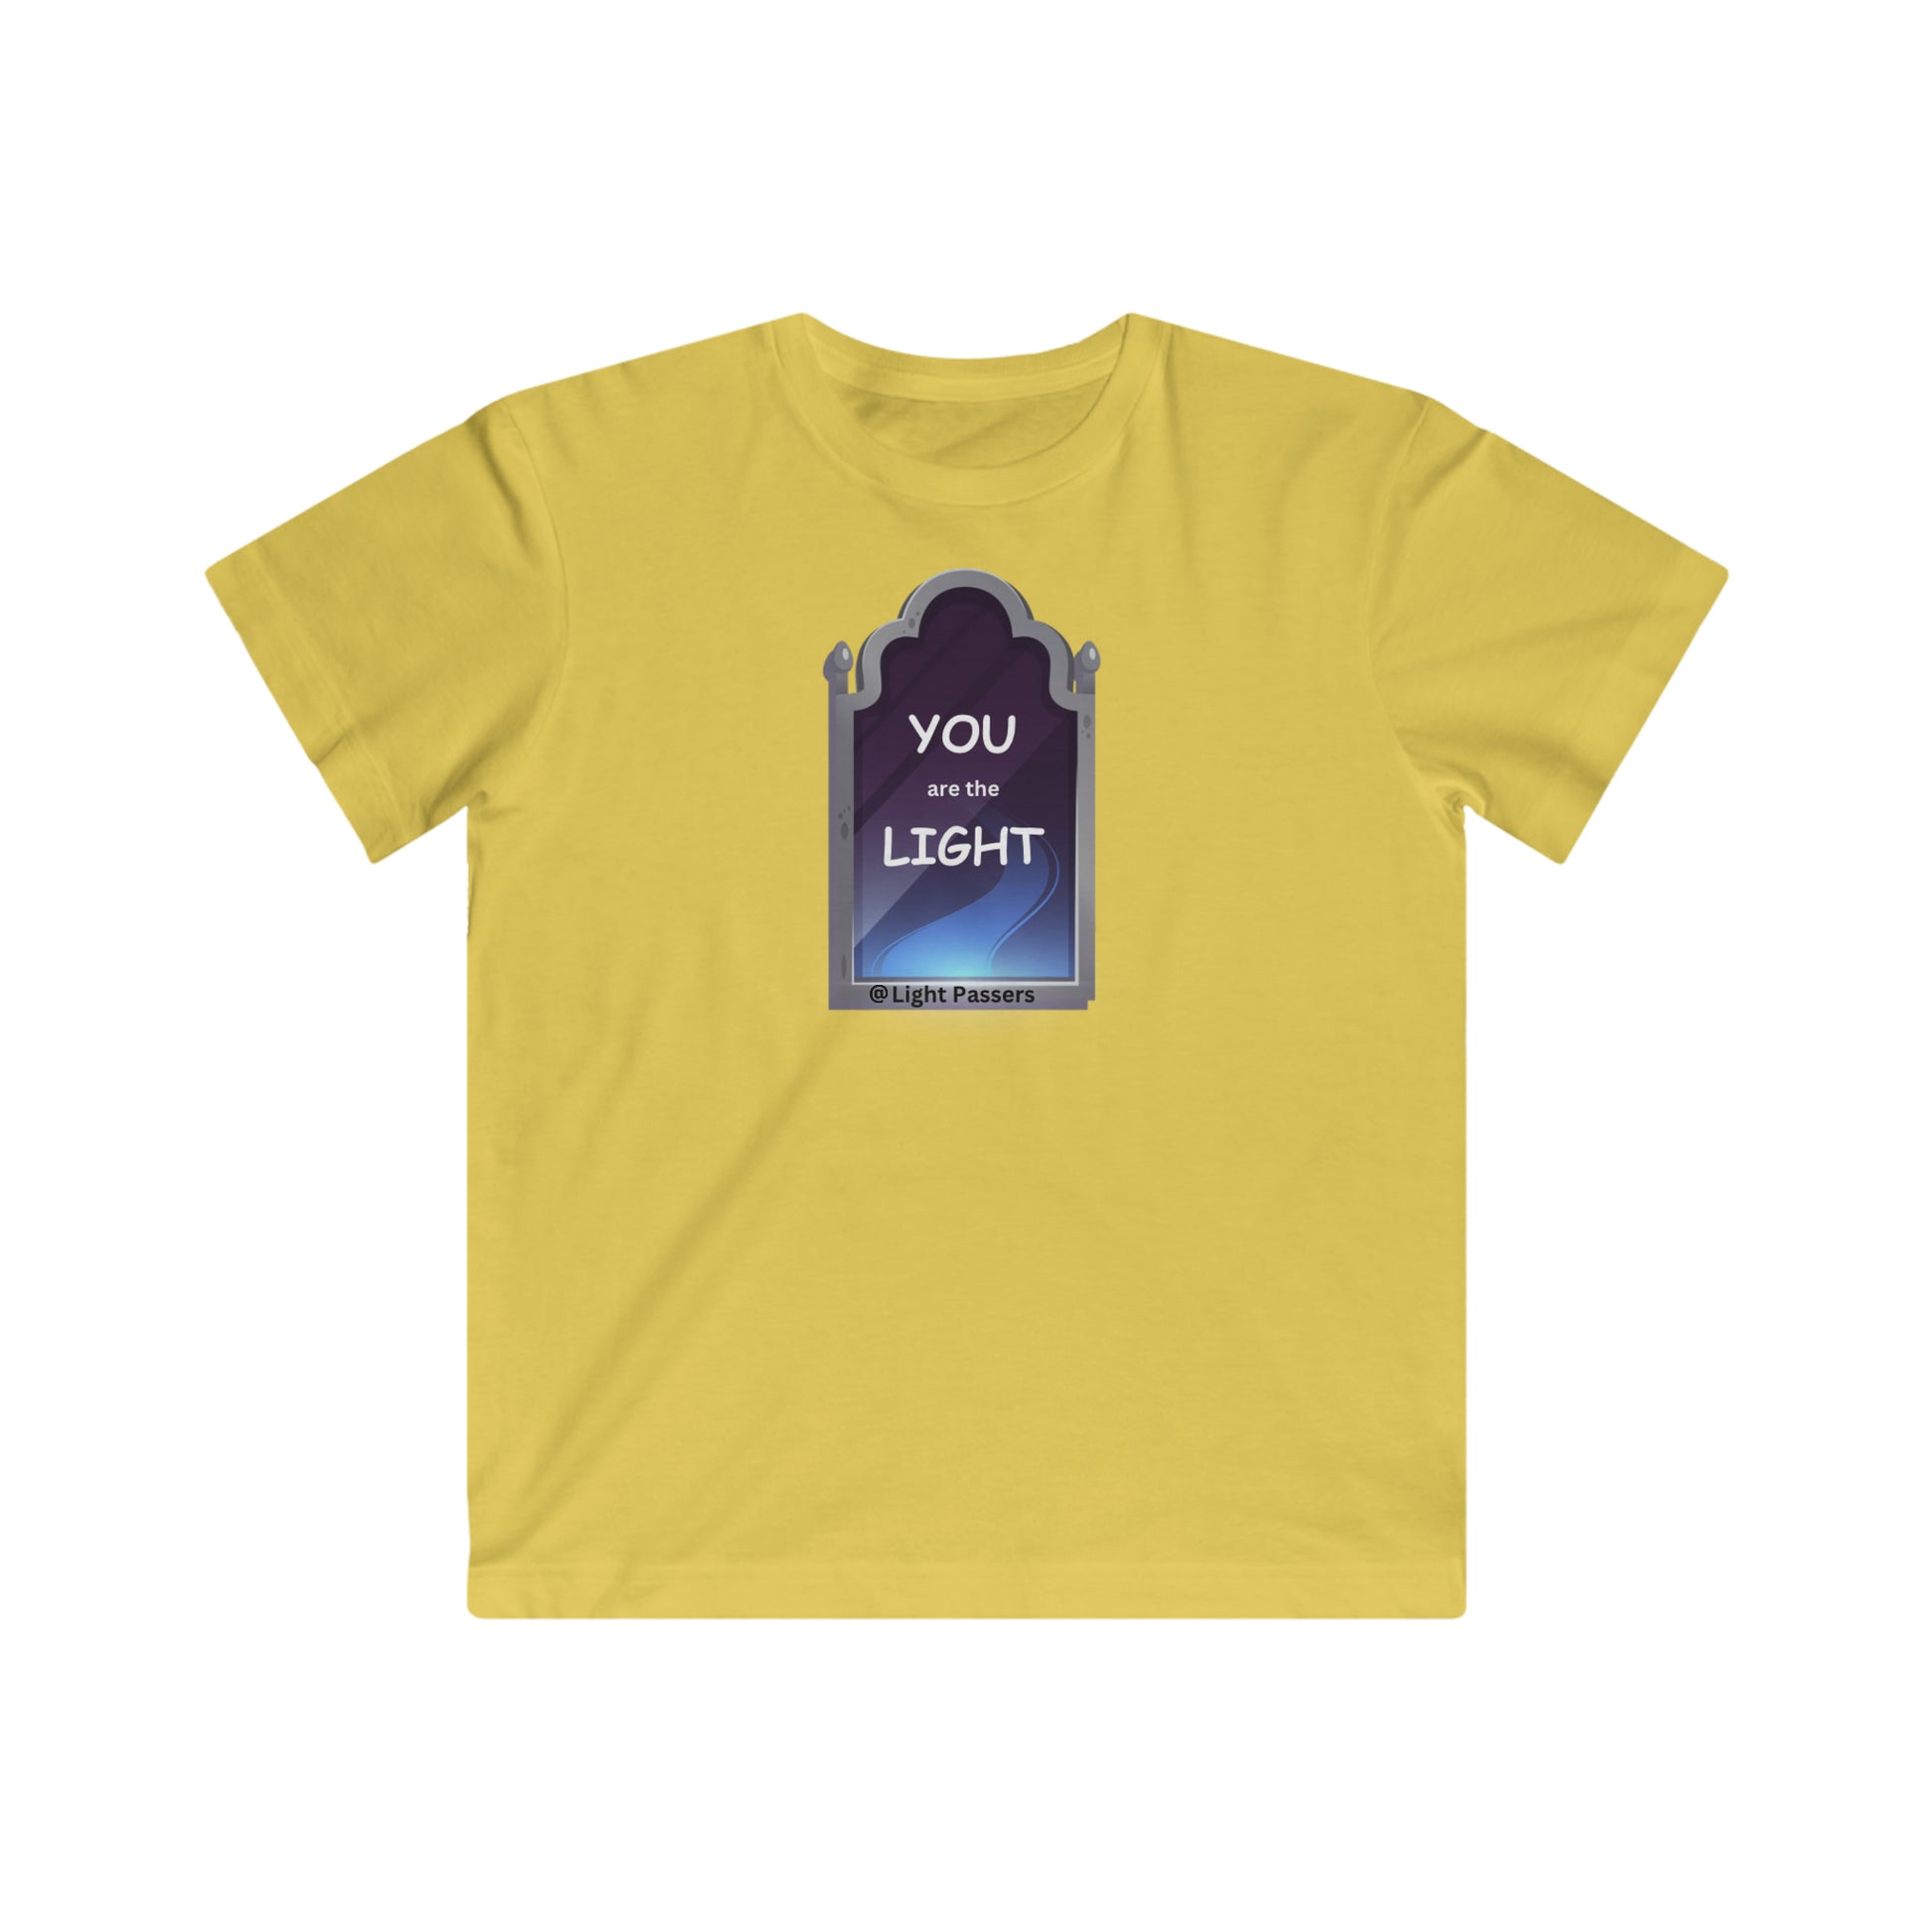 Youth T-shirt featuring a vibrant graphic design of a door on a yellow background. Made of soft, high-quality cotton with a regular fit and tear-away label. Ideal for a playful and comfortable style.